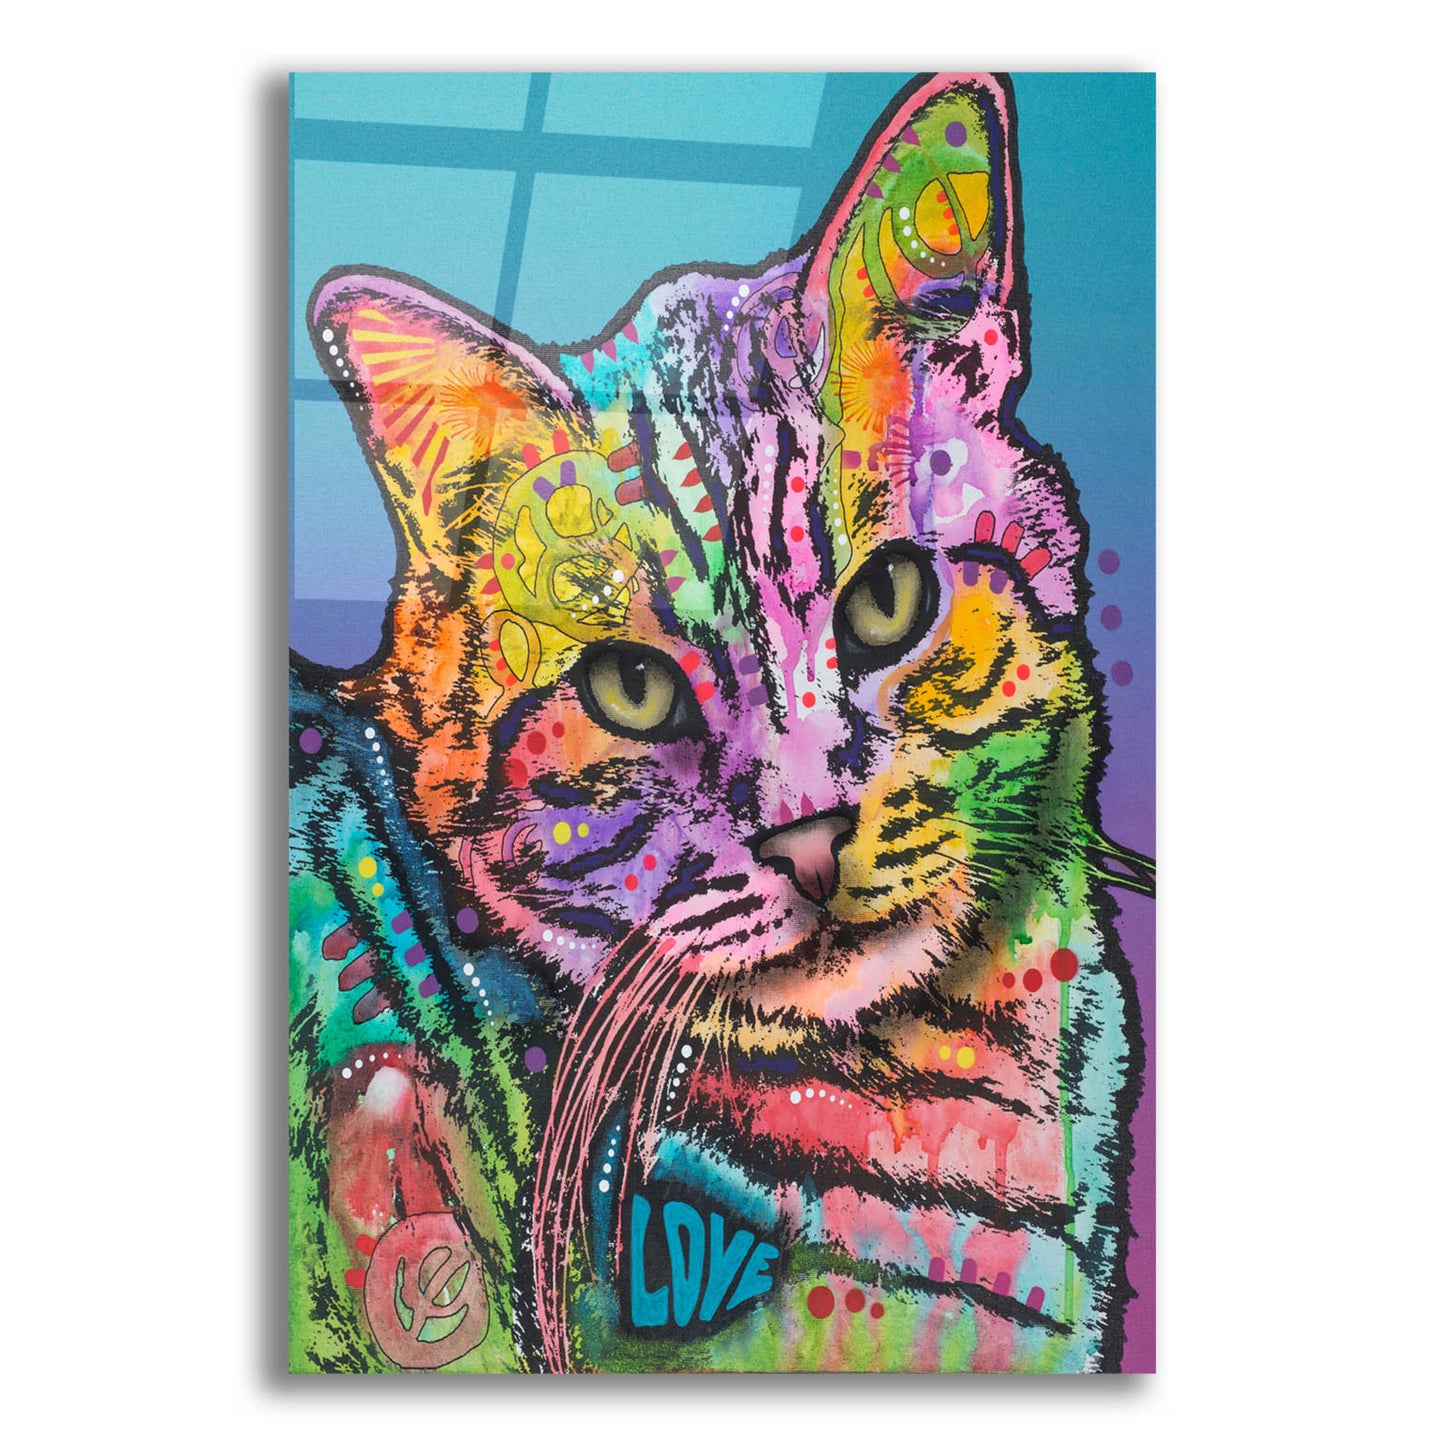 Epic Art 'Tigger' by Dean Russo, Acrylic Glass Wall Art,12x16